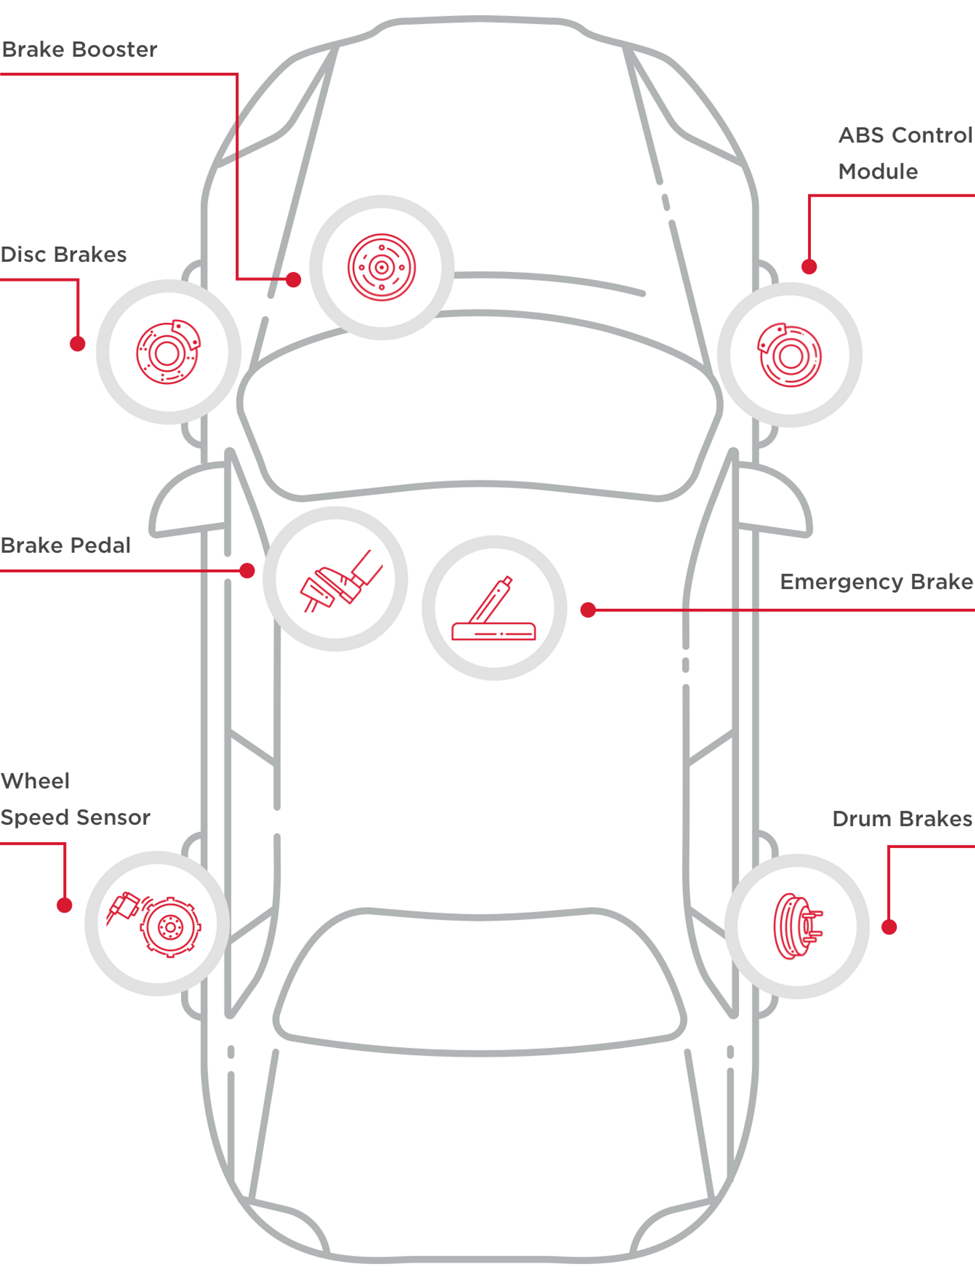 Parts of the Braking System